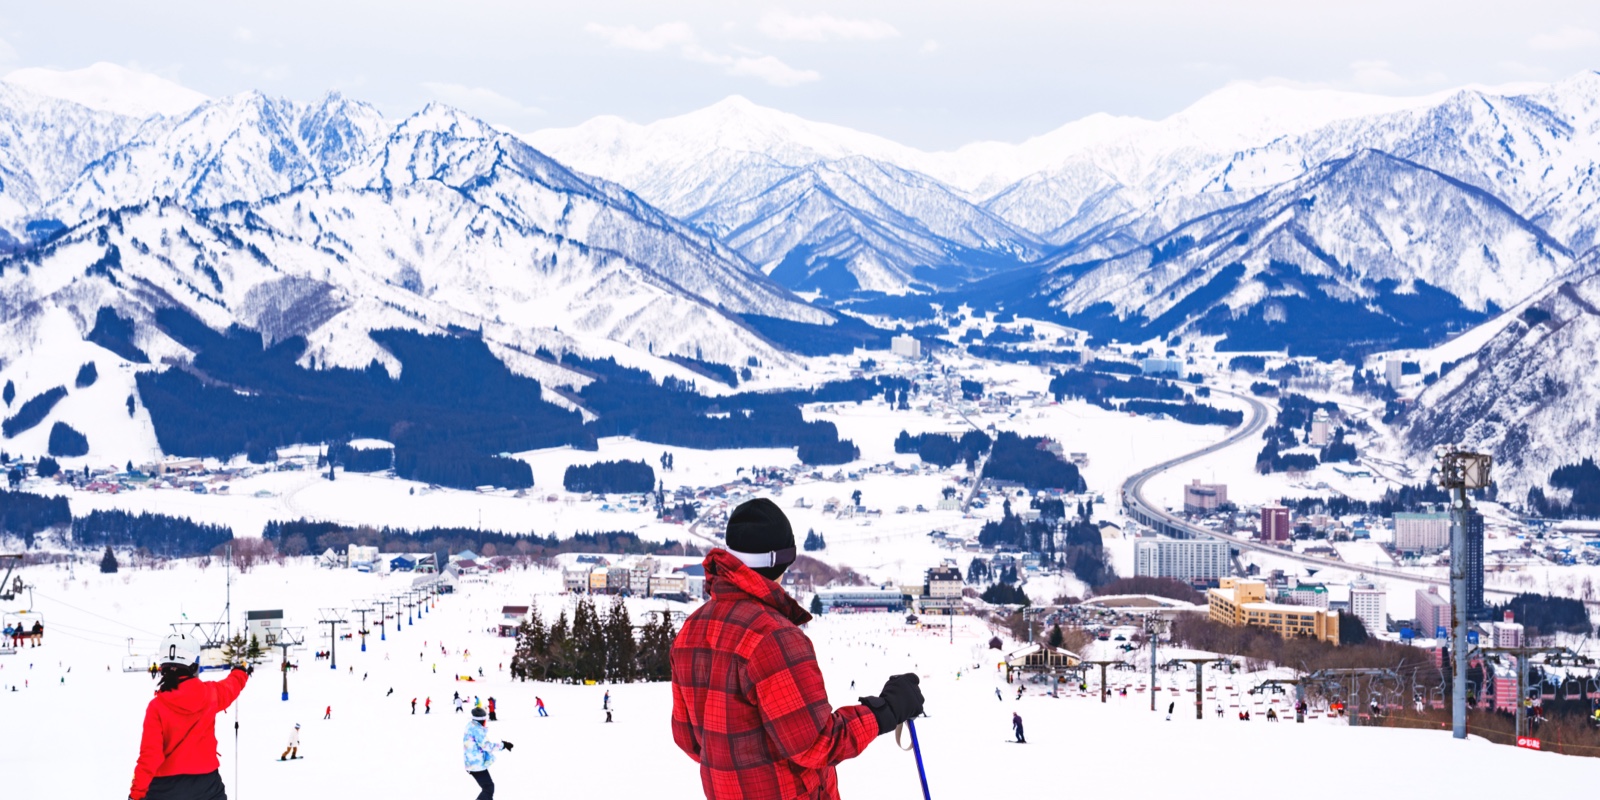 Investor Targets Ski Tourism in Japan with Huge Plan to Rival Aspen and St. Moritz